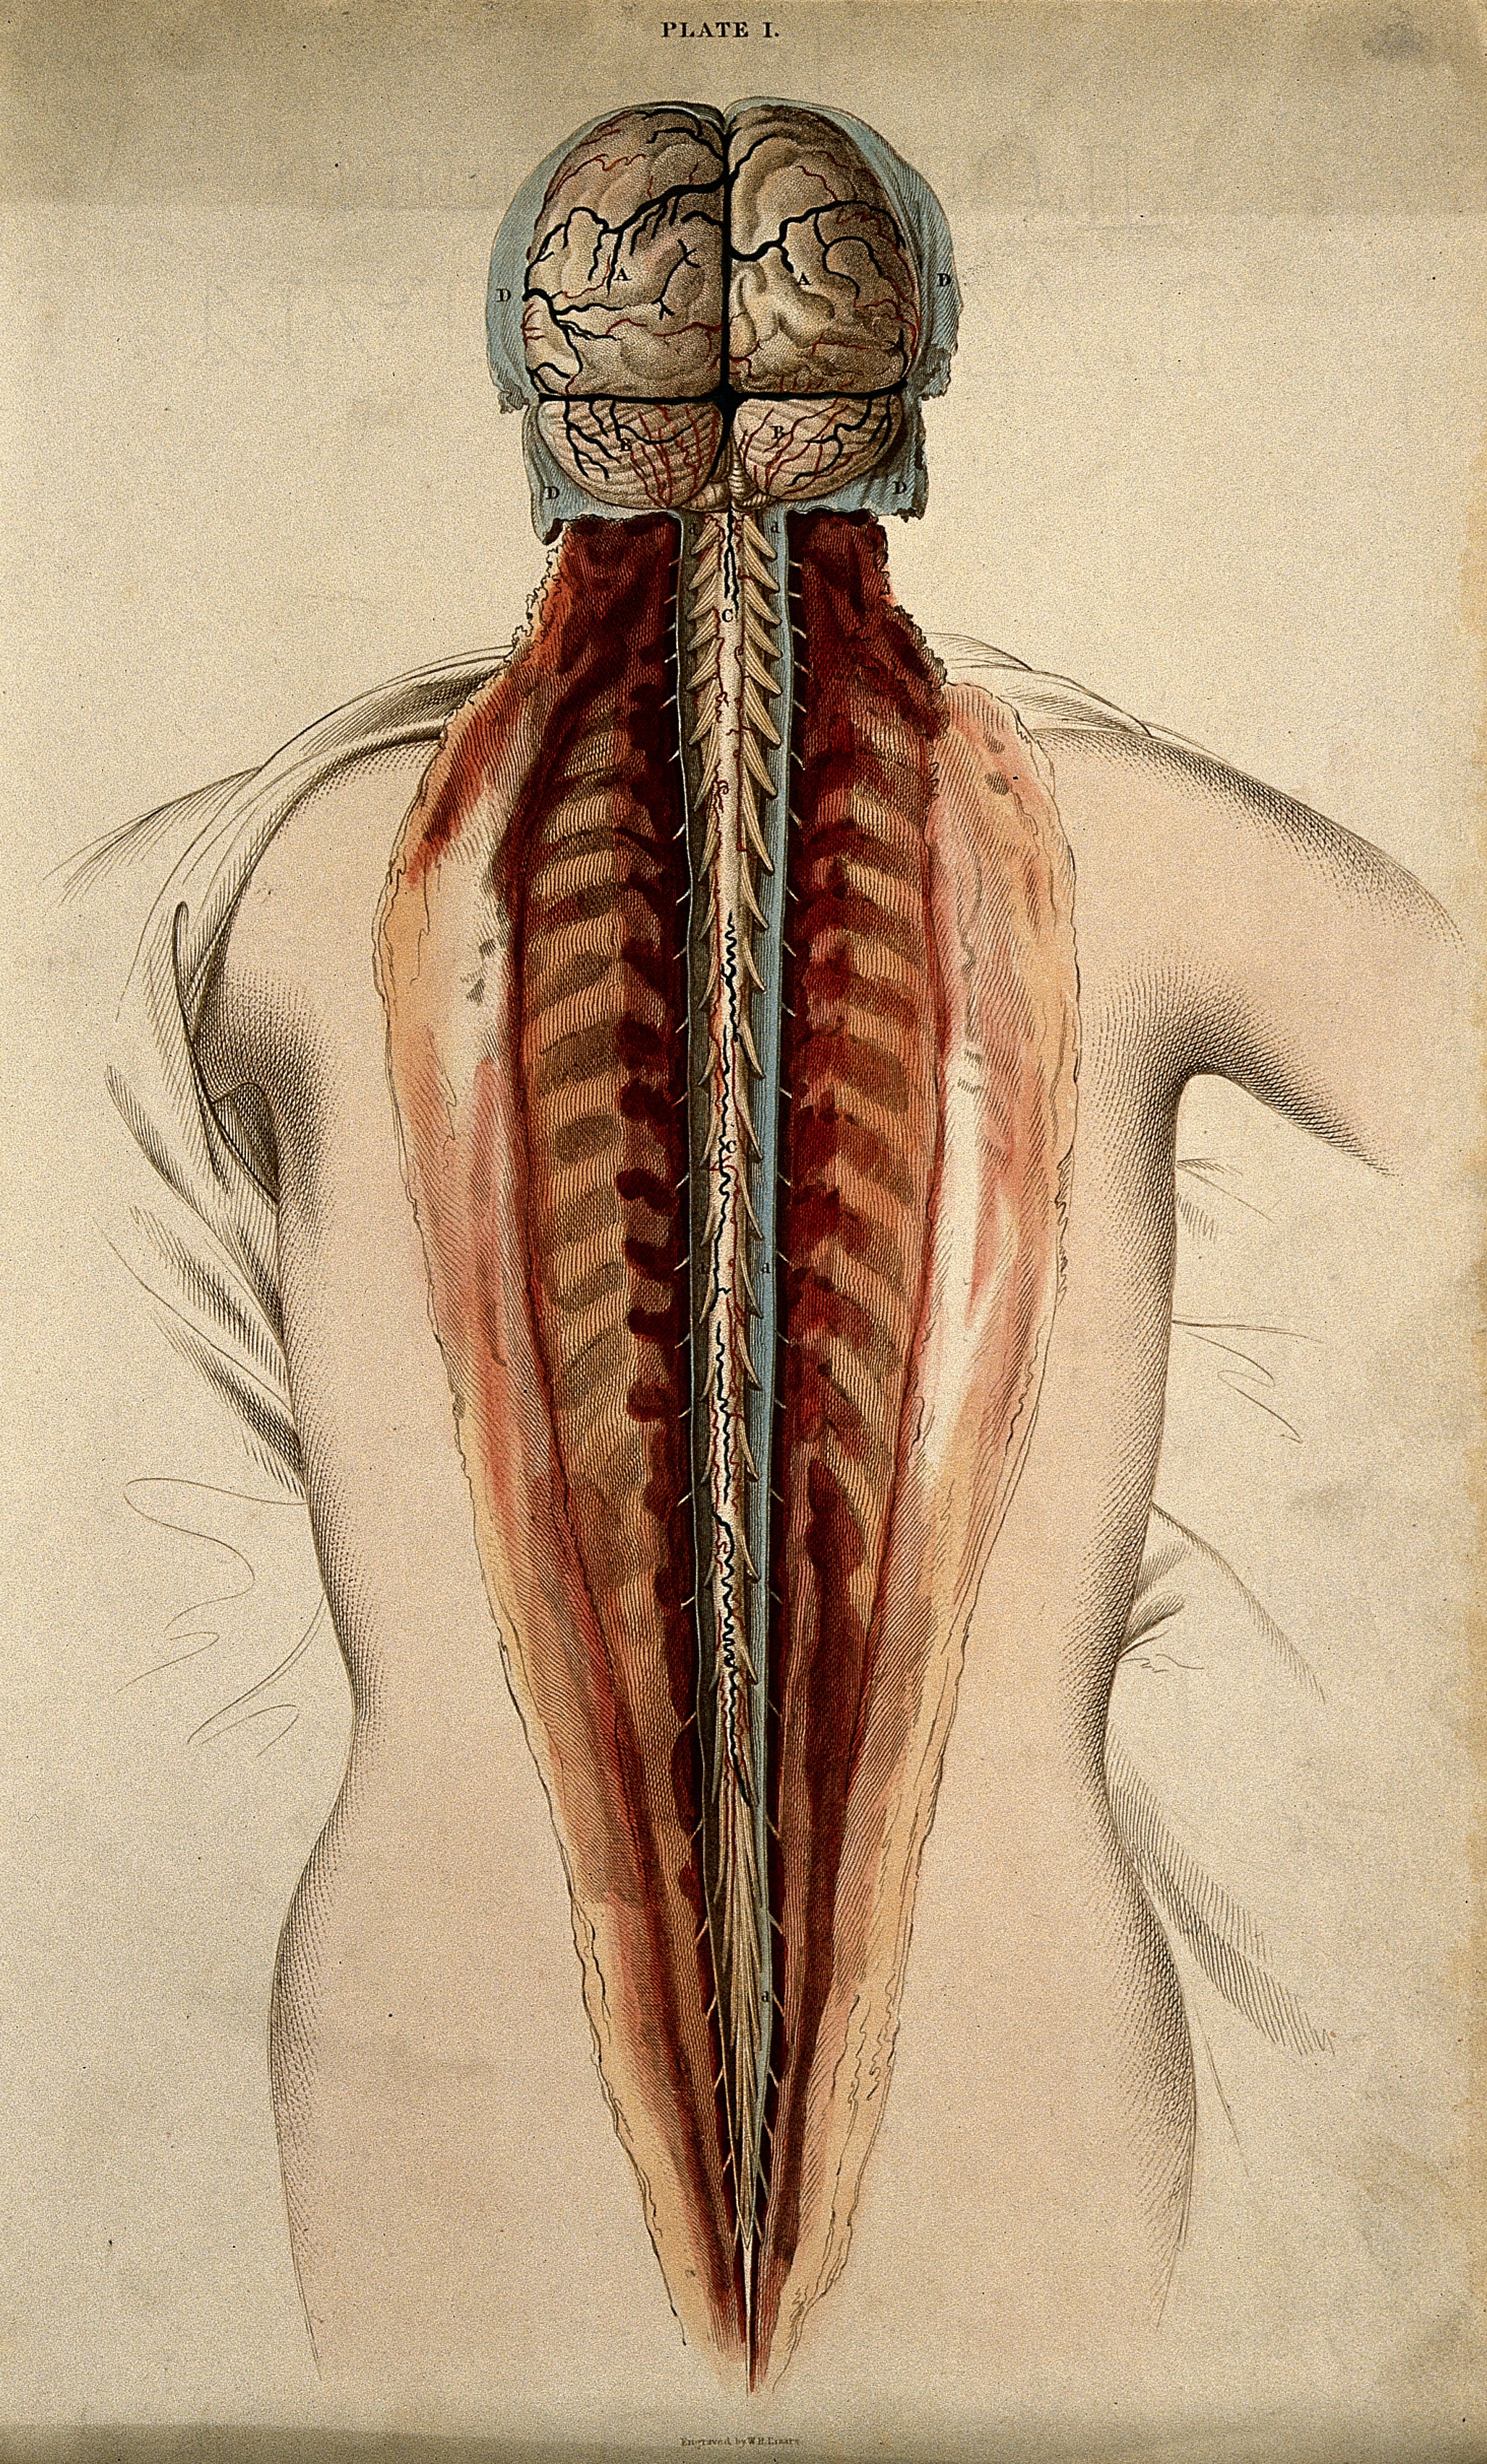 A colored line engraving of the brain and spinal cord shown from a dissection of the back